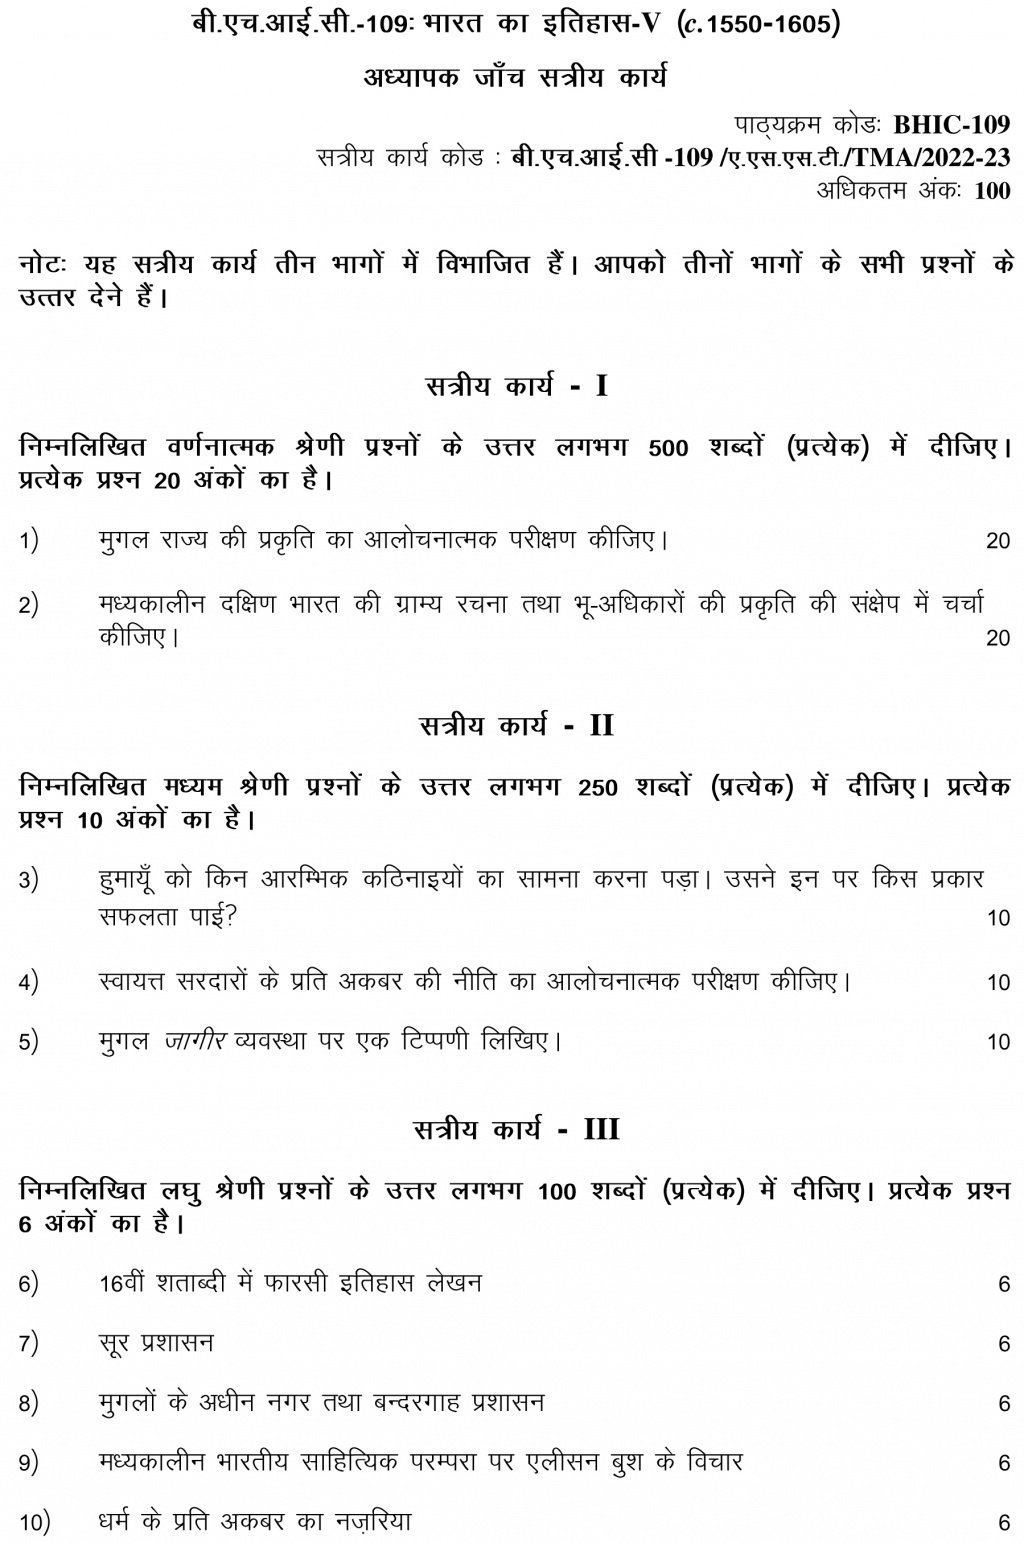 IGNOU BHIC-109 - History of India –V (c. 1550 – 1605) Latest Solved Assignment-July 2022 – January 2023